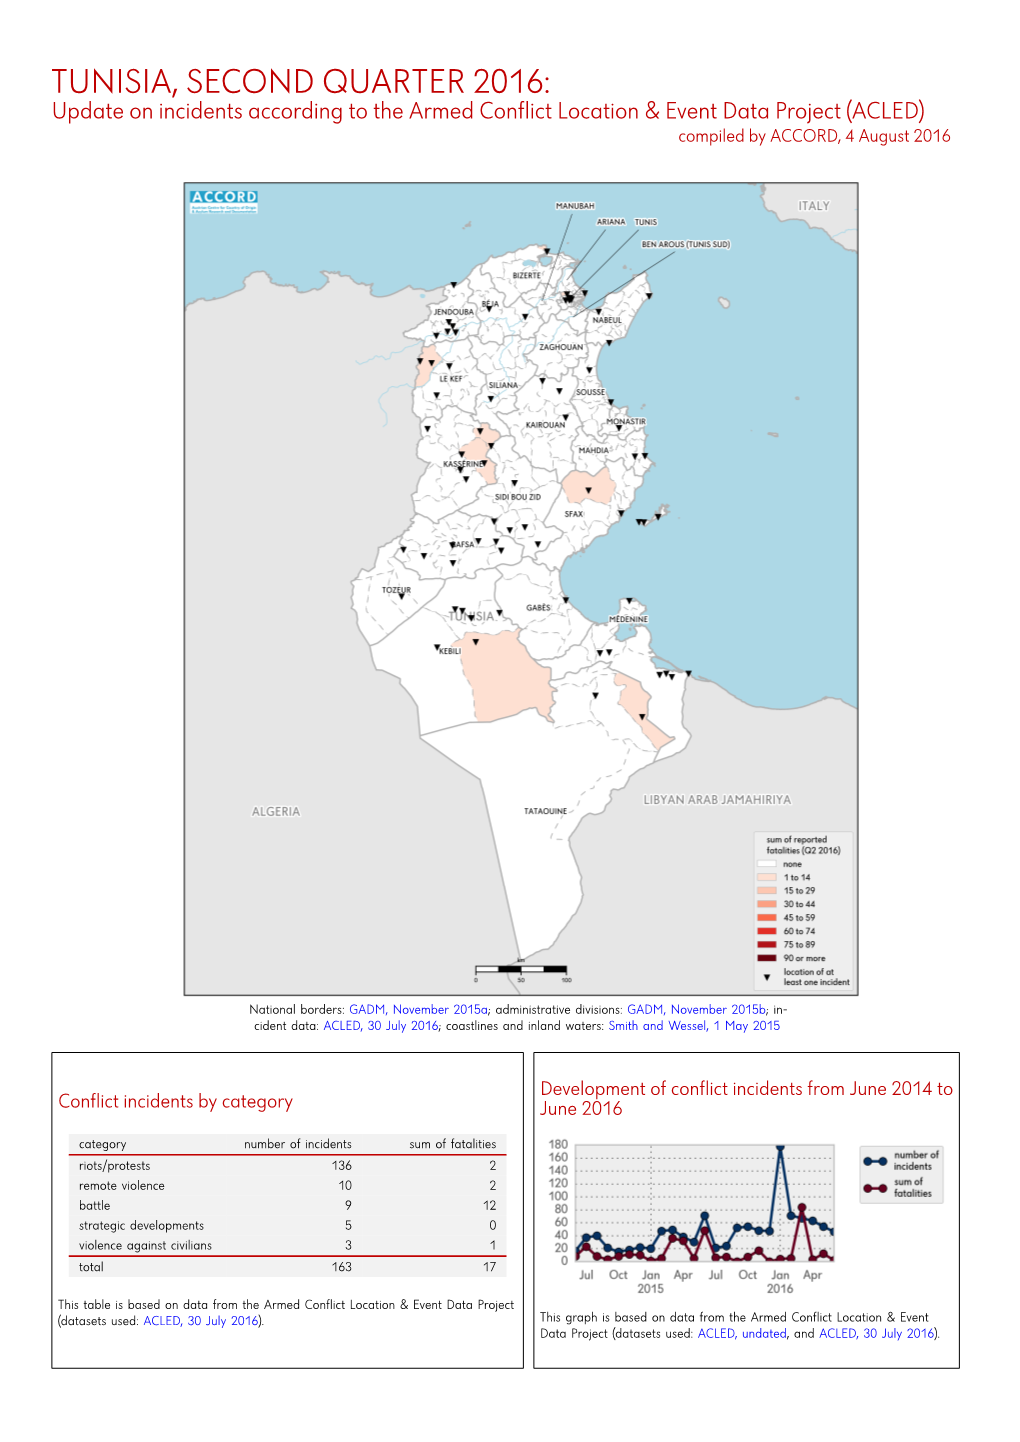 Tunisia, Second Quarter 2016: Update on Incidents According to the Armed Conflict Location & Event Data Project